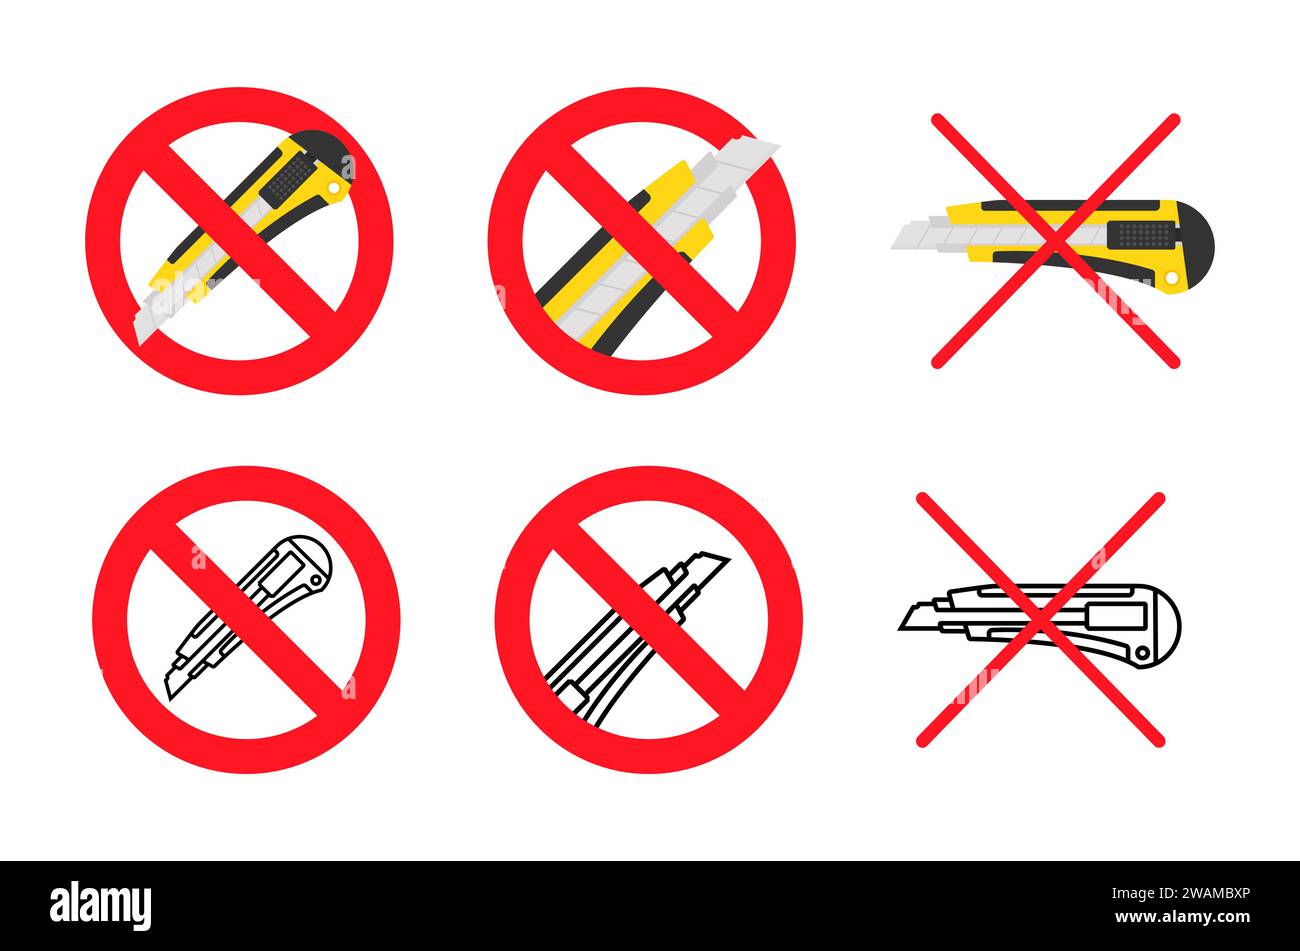 Prohibition signs vector illustration set forbidding stationery knives and cutters, ideal for safety guidelines and restricted tool use policies. Stock Vector